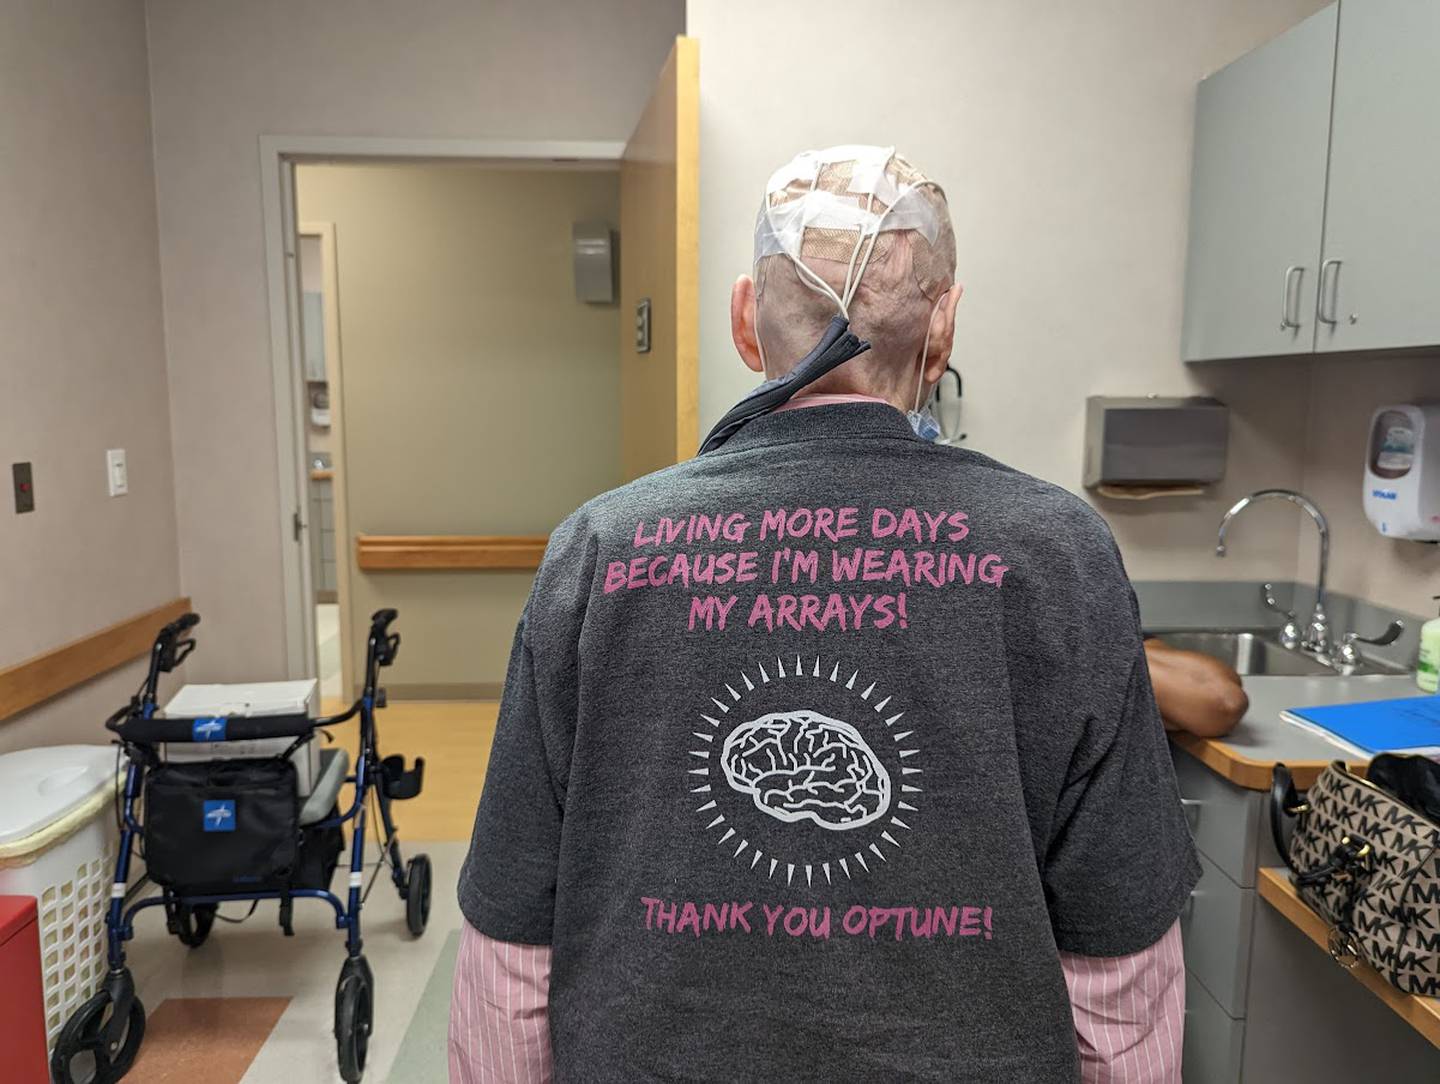 Libby Hall, 75, of Joliet, shows off her shirt on Friday, Sept. 16, 2022, at Joliet Oncology-Hematology Associates. Hall was diagnosed with glioblastoma multiform, an aggressive brain cancer, in 2020 and is currently wearing a device called Optune, which delivers an electrical field into the cancer cells in her brain.